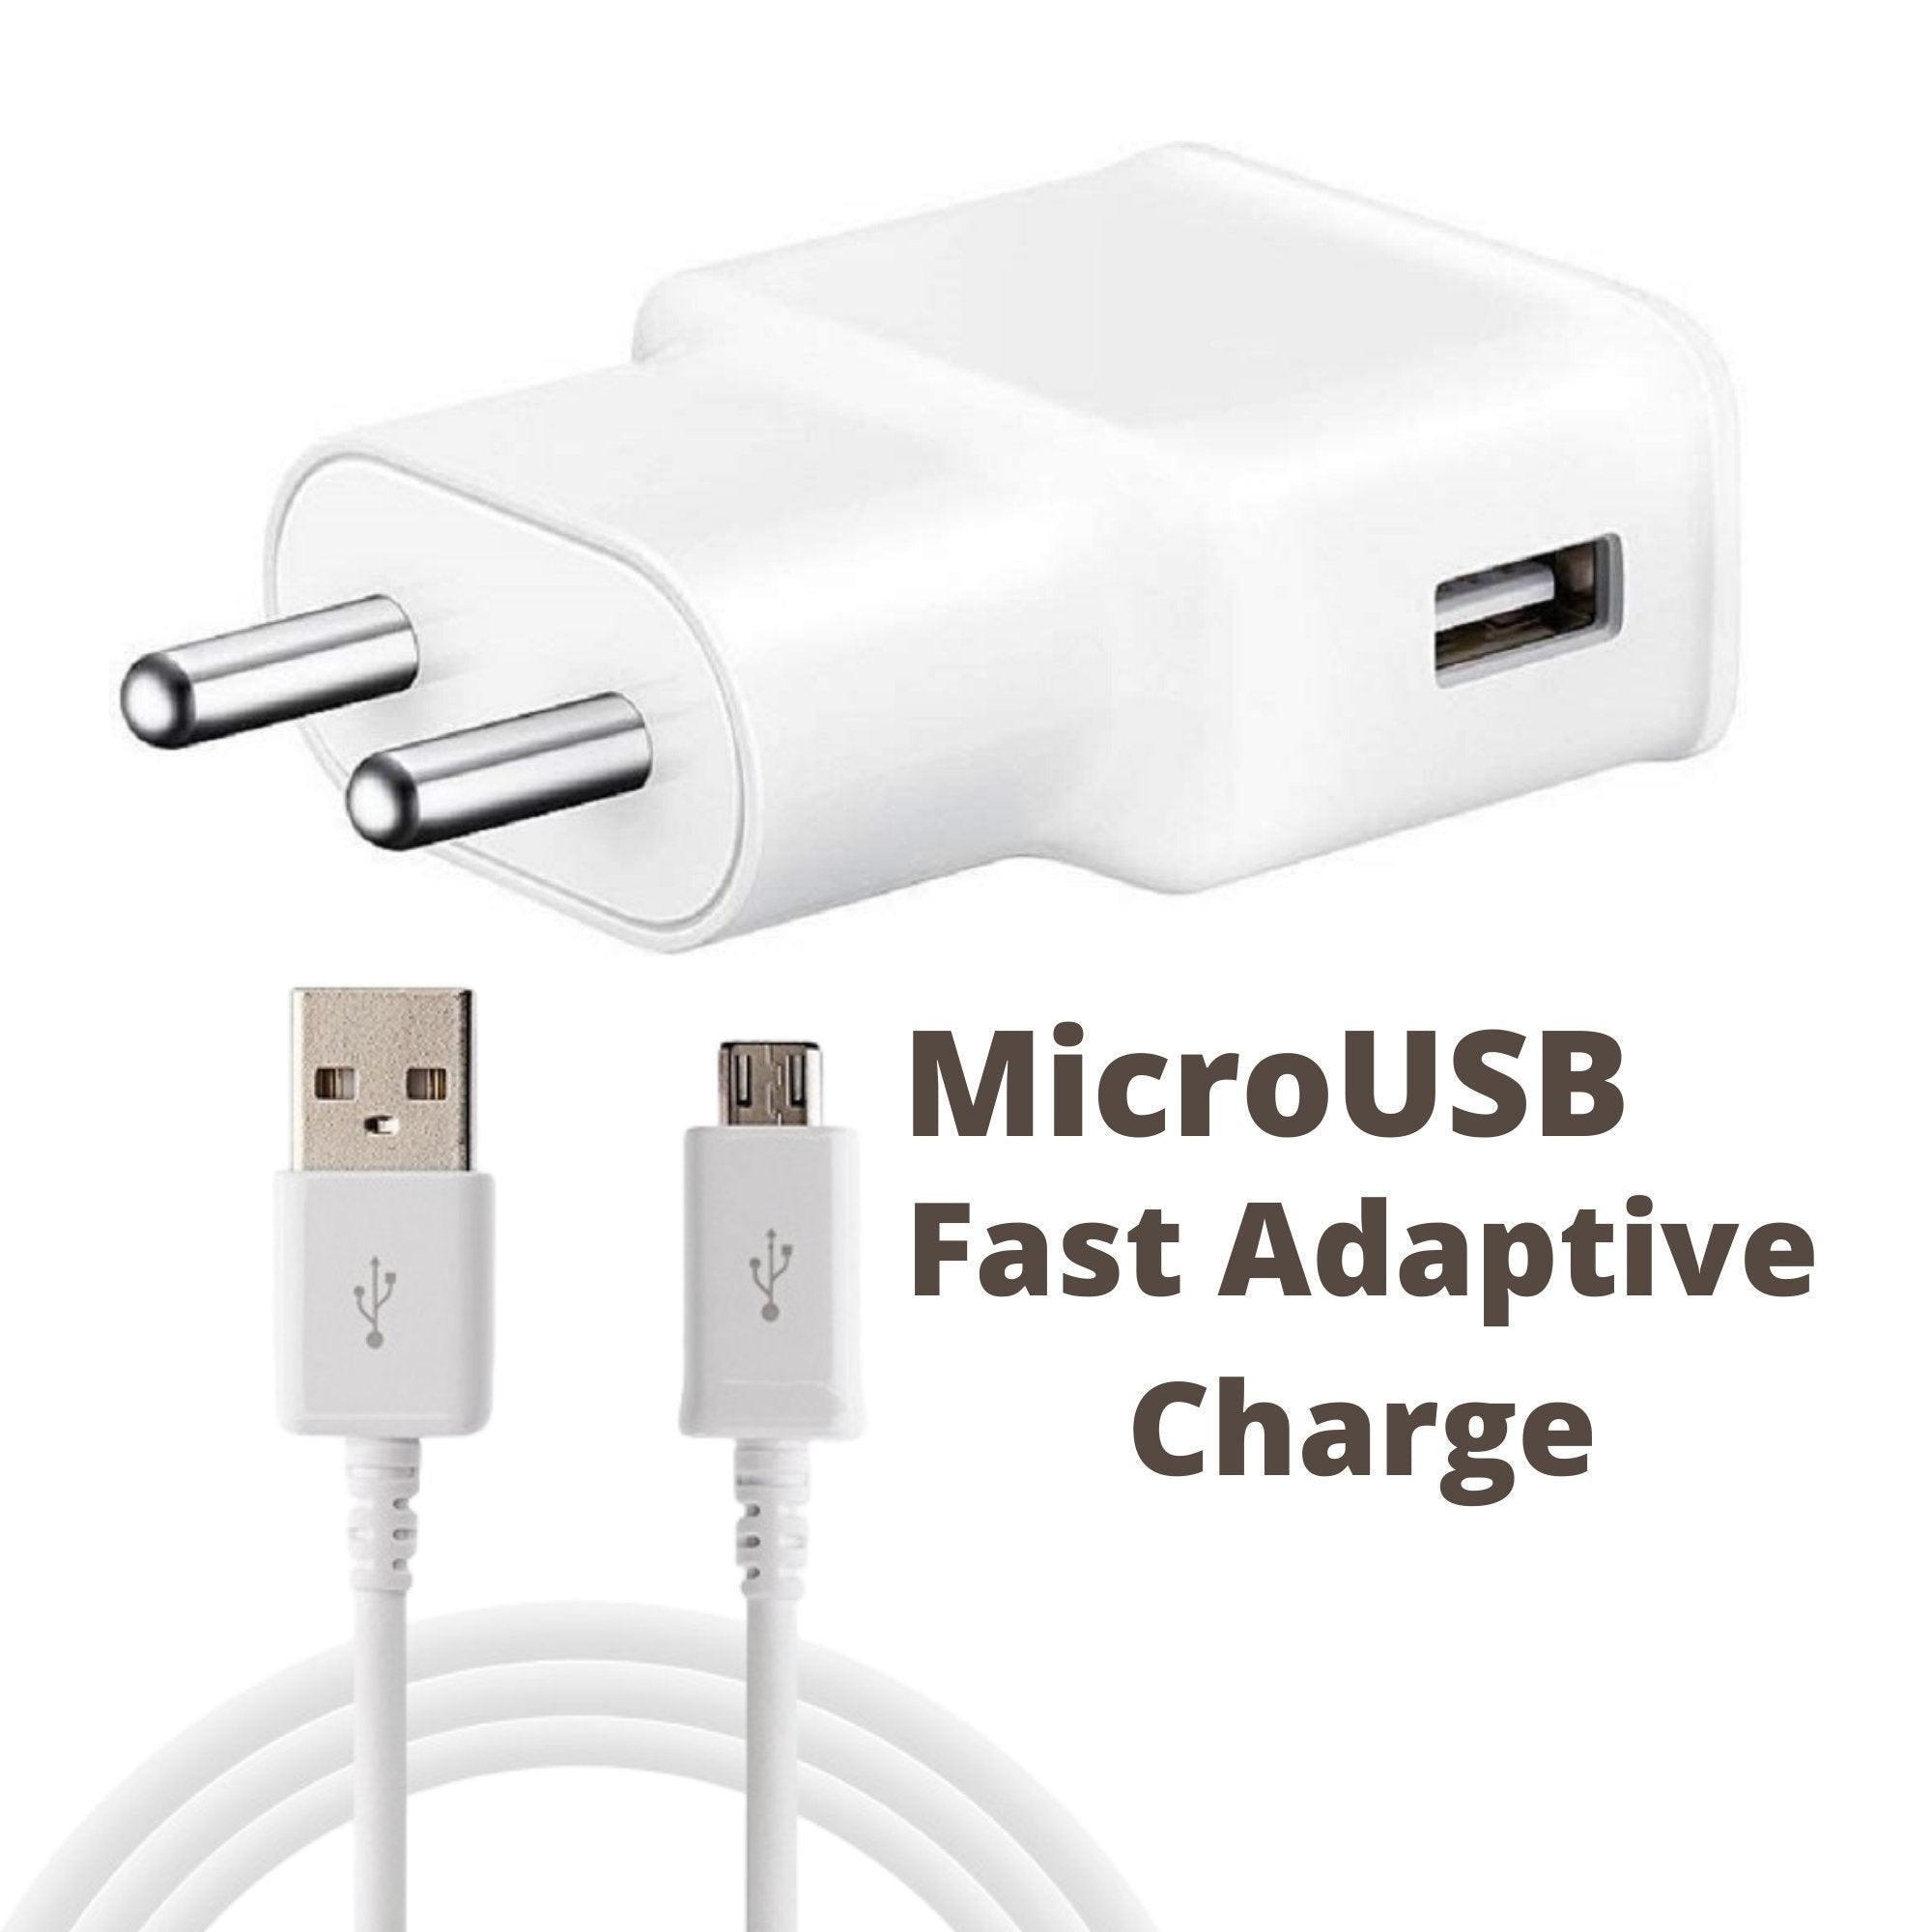 Samsung M02 Adaptive Mobile Charger 2 Amp With Adaptive Fast Cable White